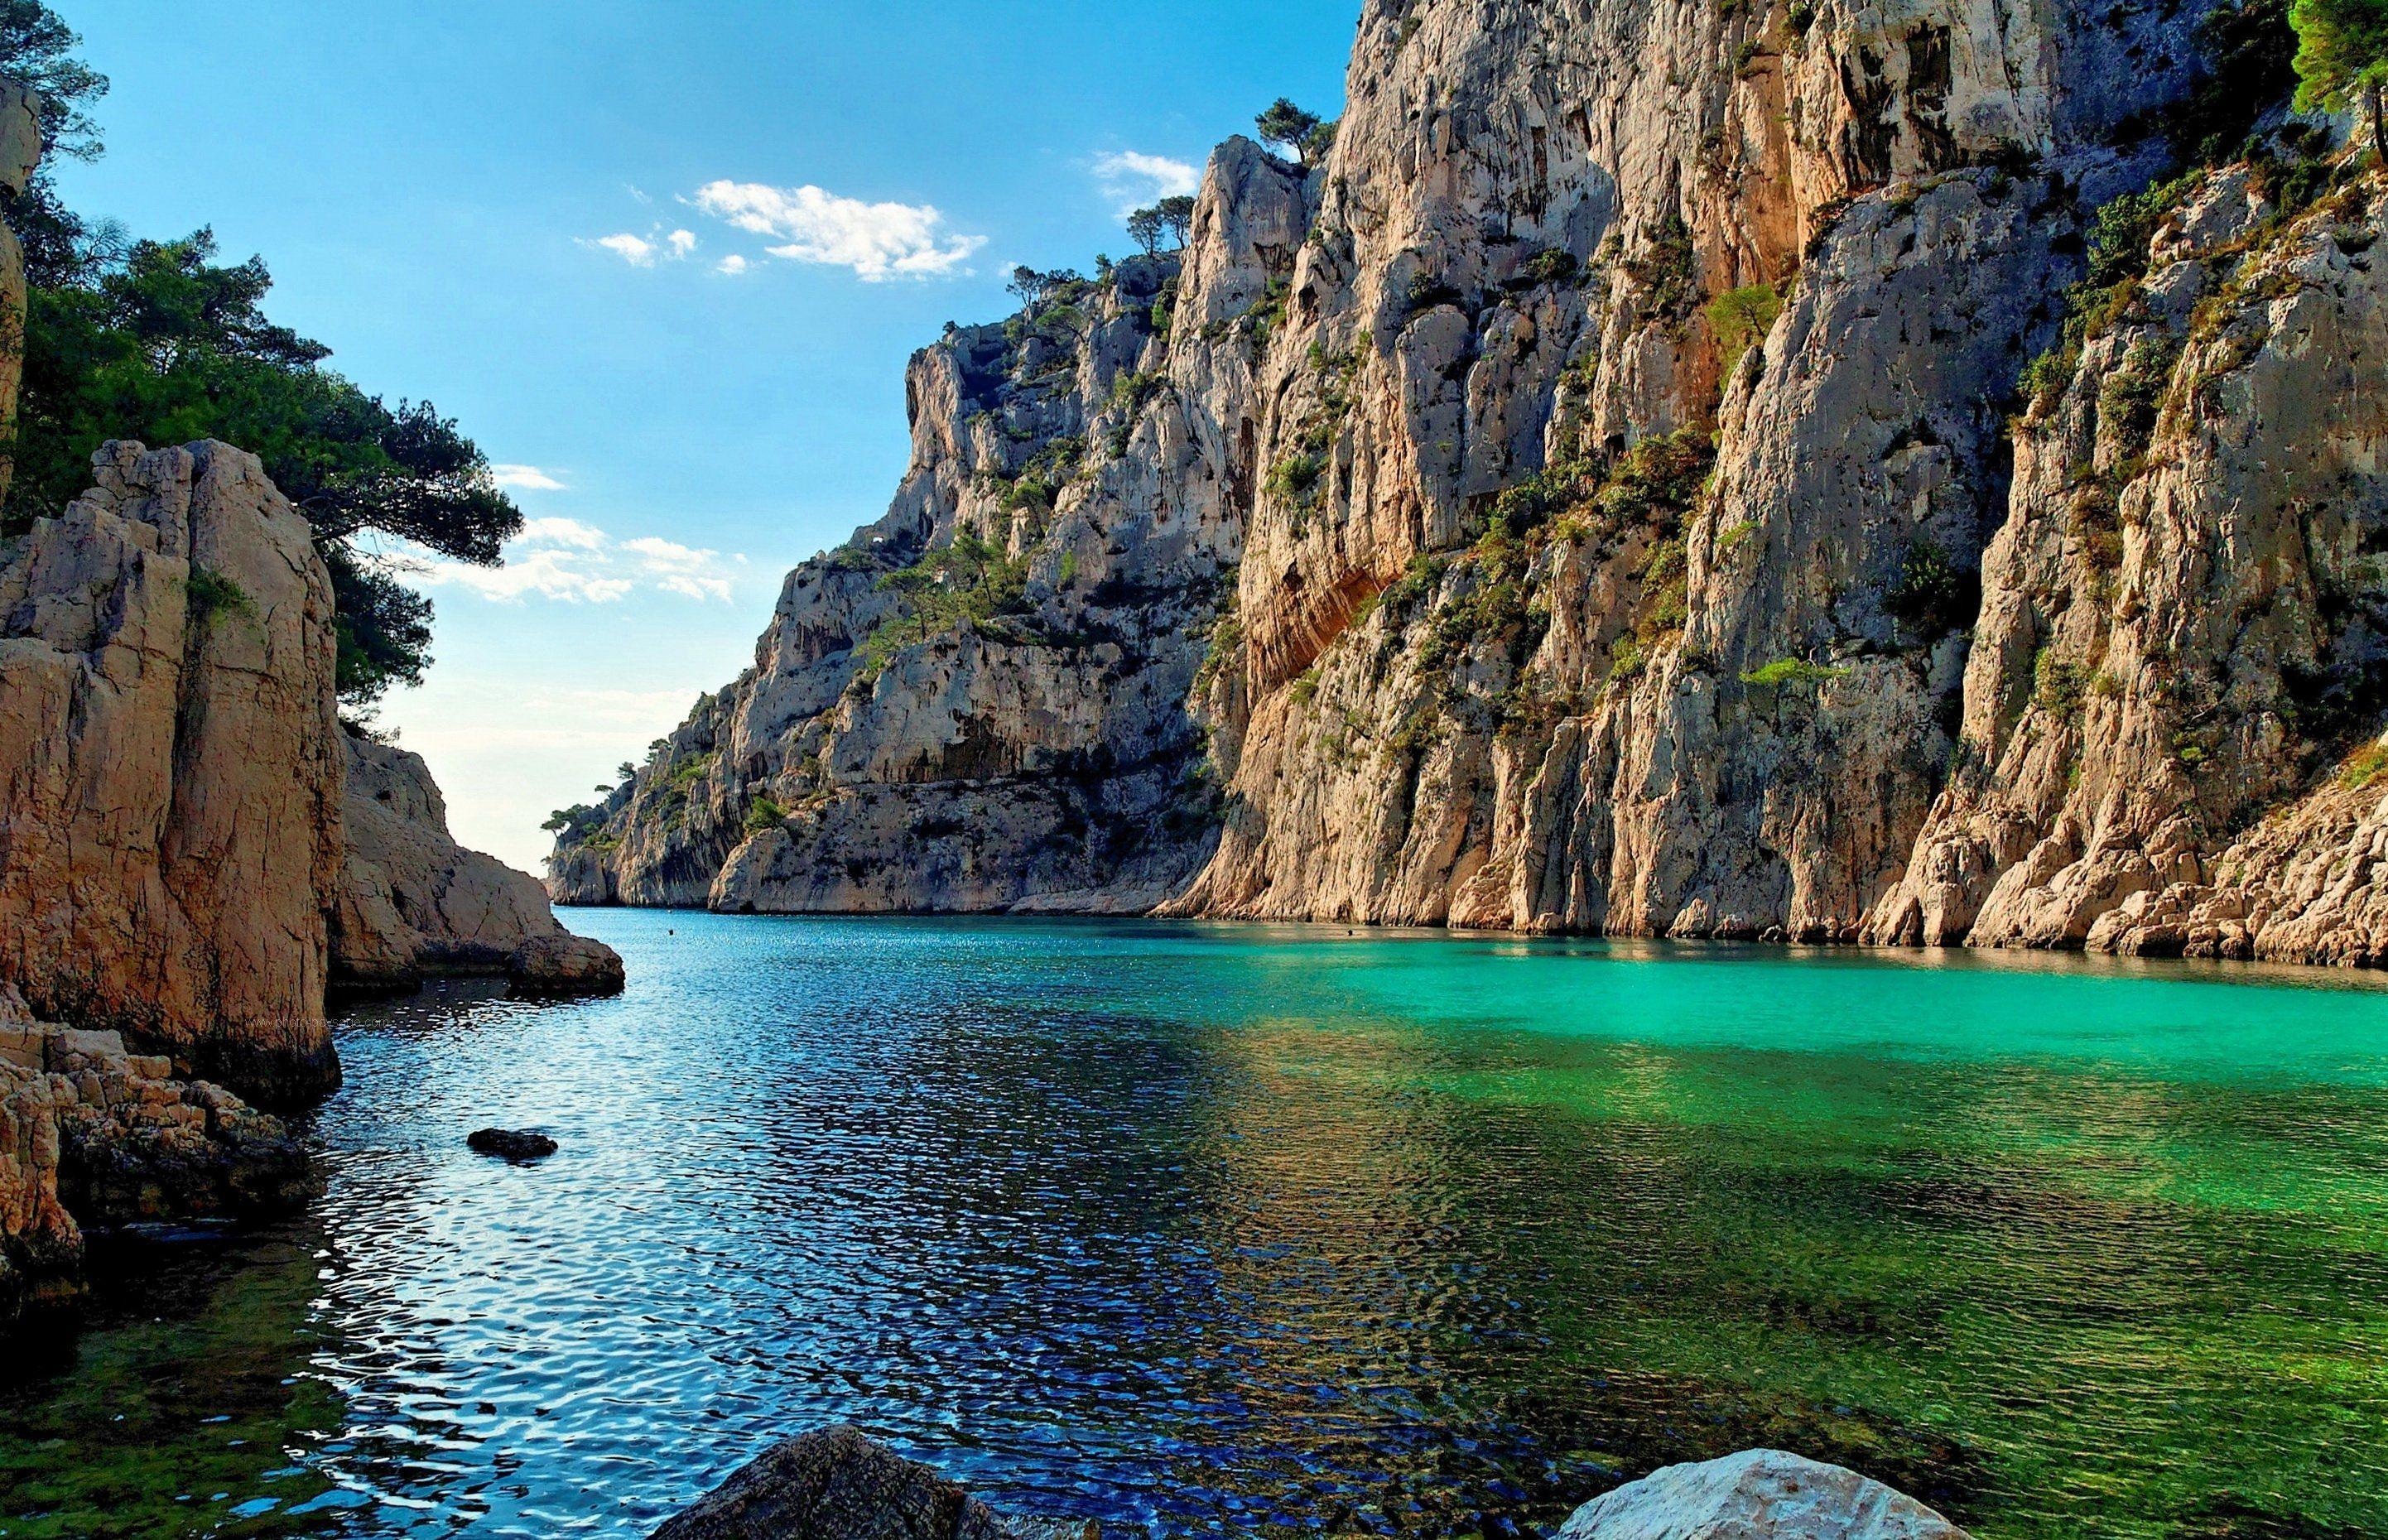 Mediterranean 1080P 2k 4k HD wallpapers backgrounds free download   Rare Gallery